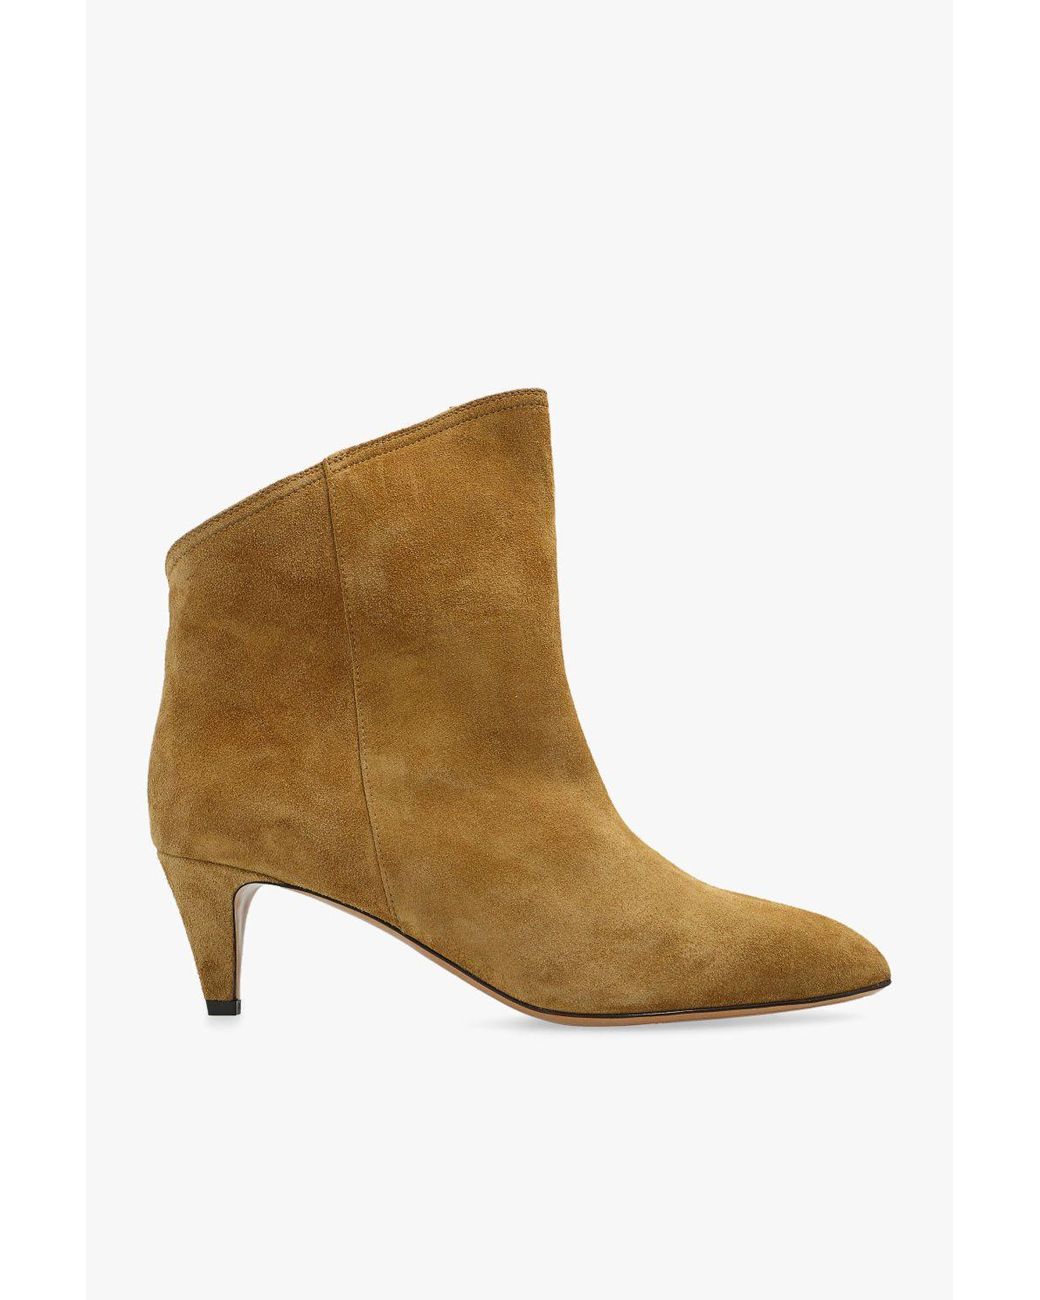 Isabel Marant 'dripi' Heeled Ankle Boots in Natural | Lyst